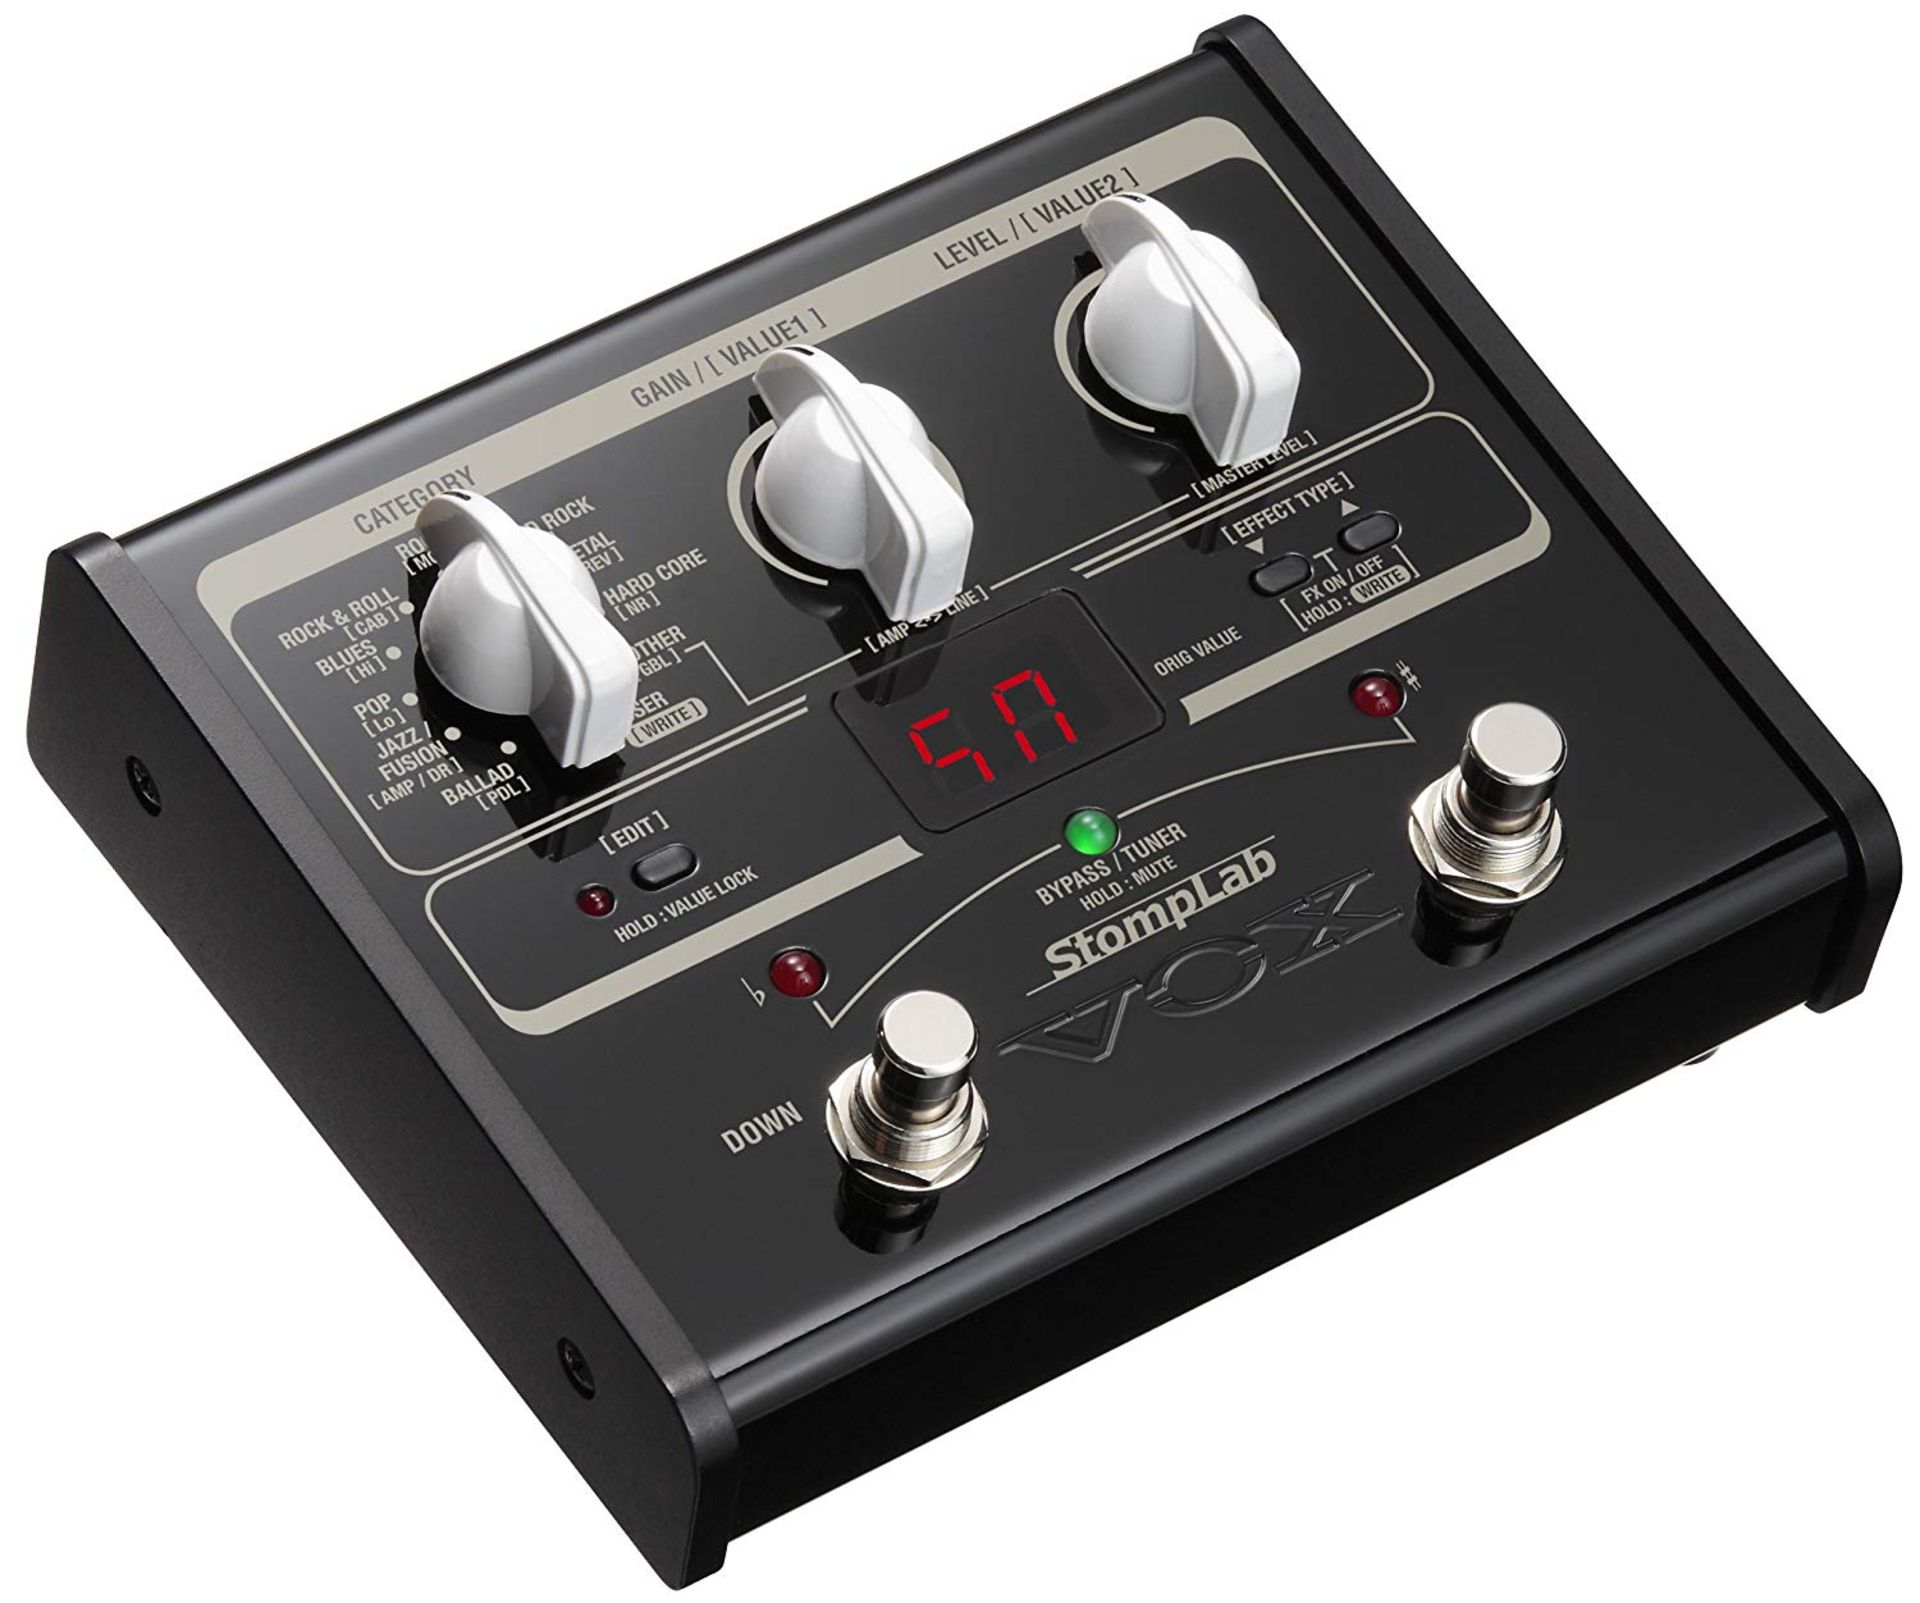 VOX SL1G 1G Amplifier Multi Effect Stomplab Pedal for Guitar RRP £129.99